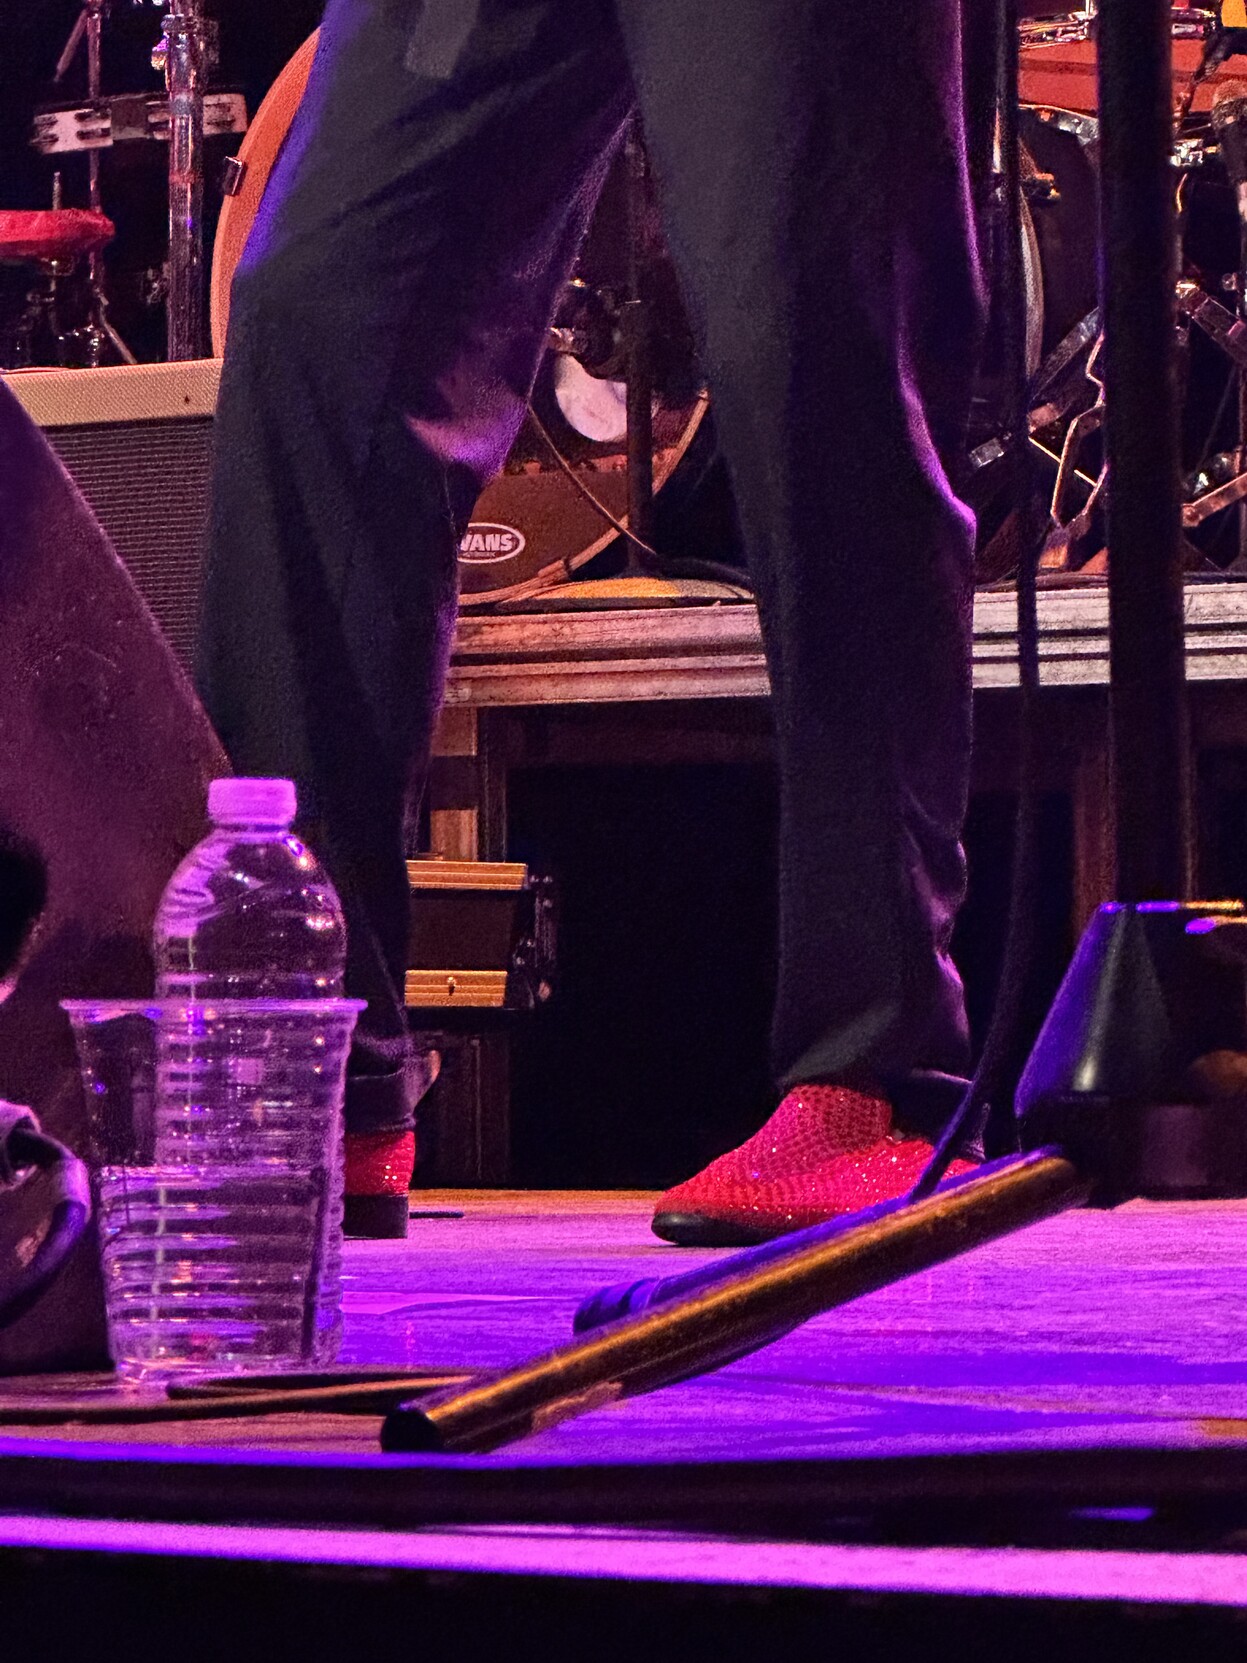 Adrian Belew’s fancy red sequined shoes